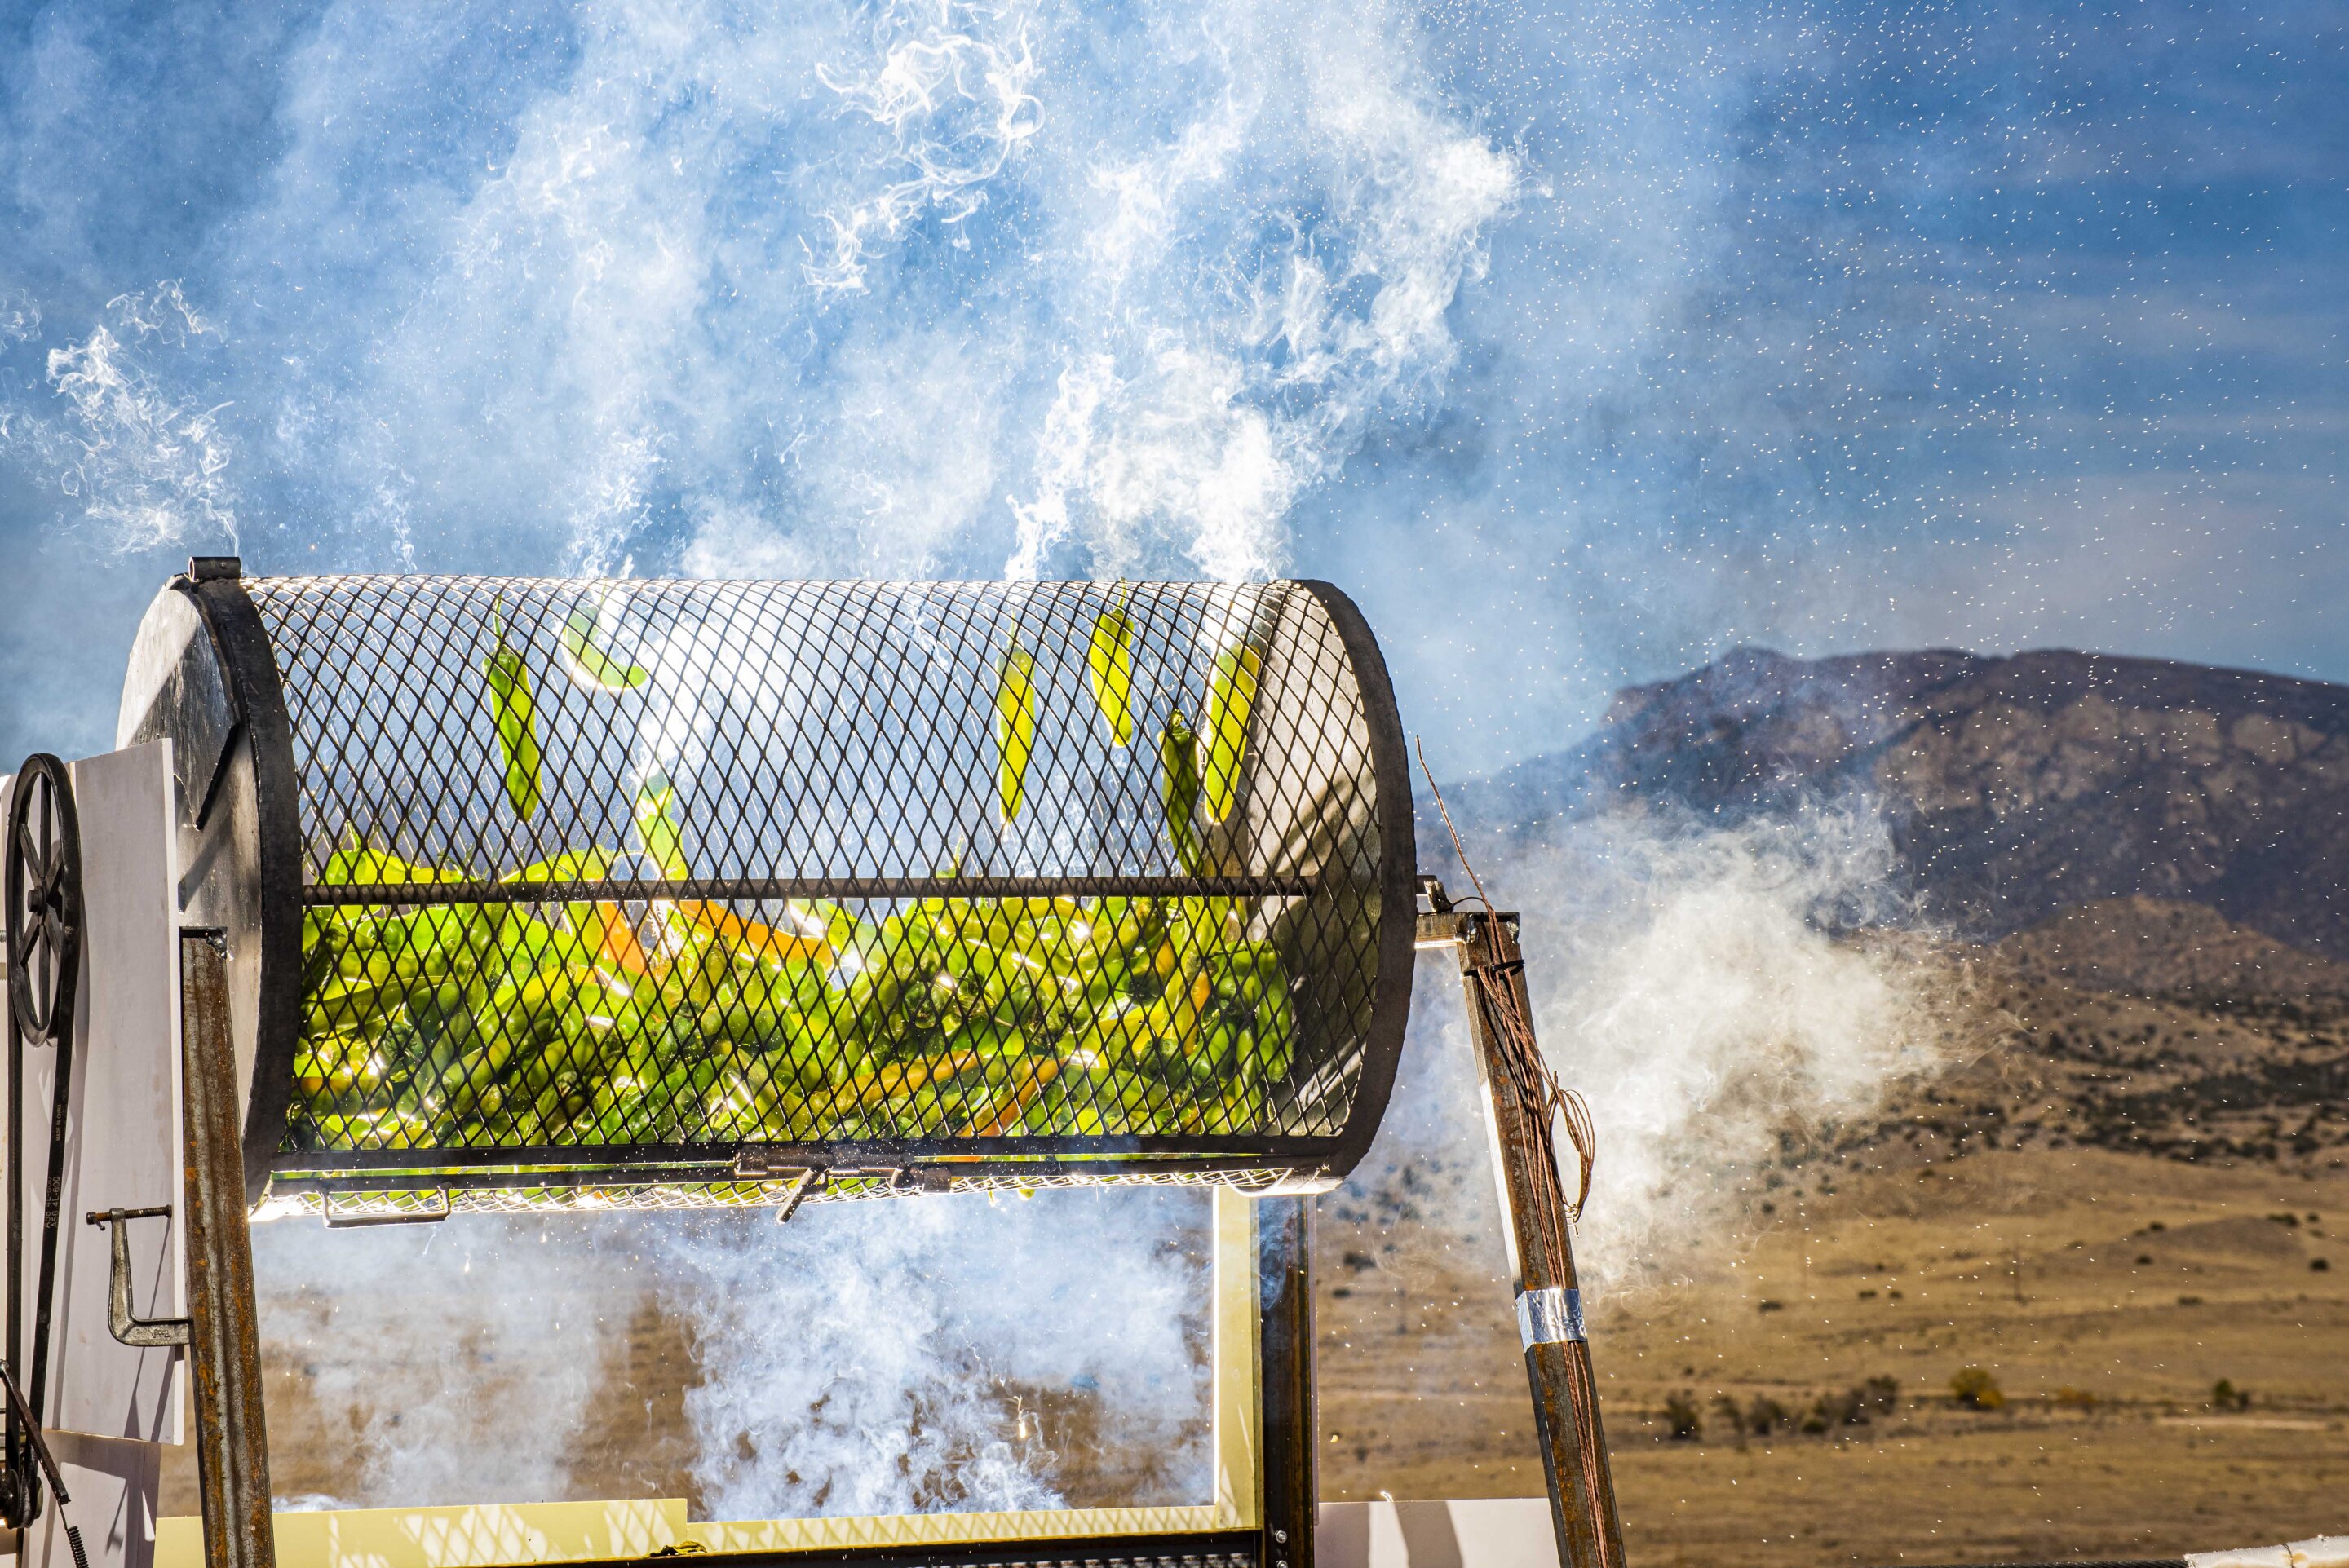 #Using the power of the sun to roast green chile